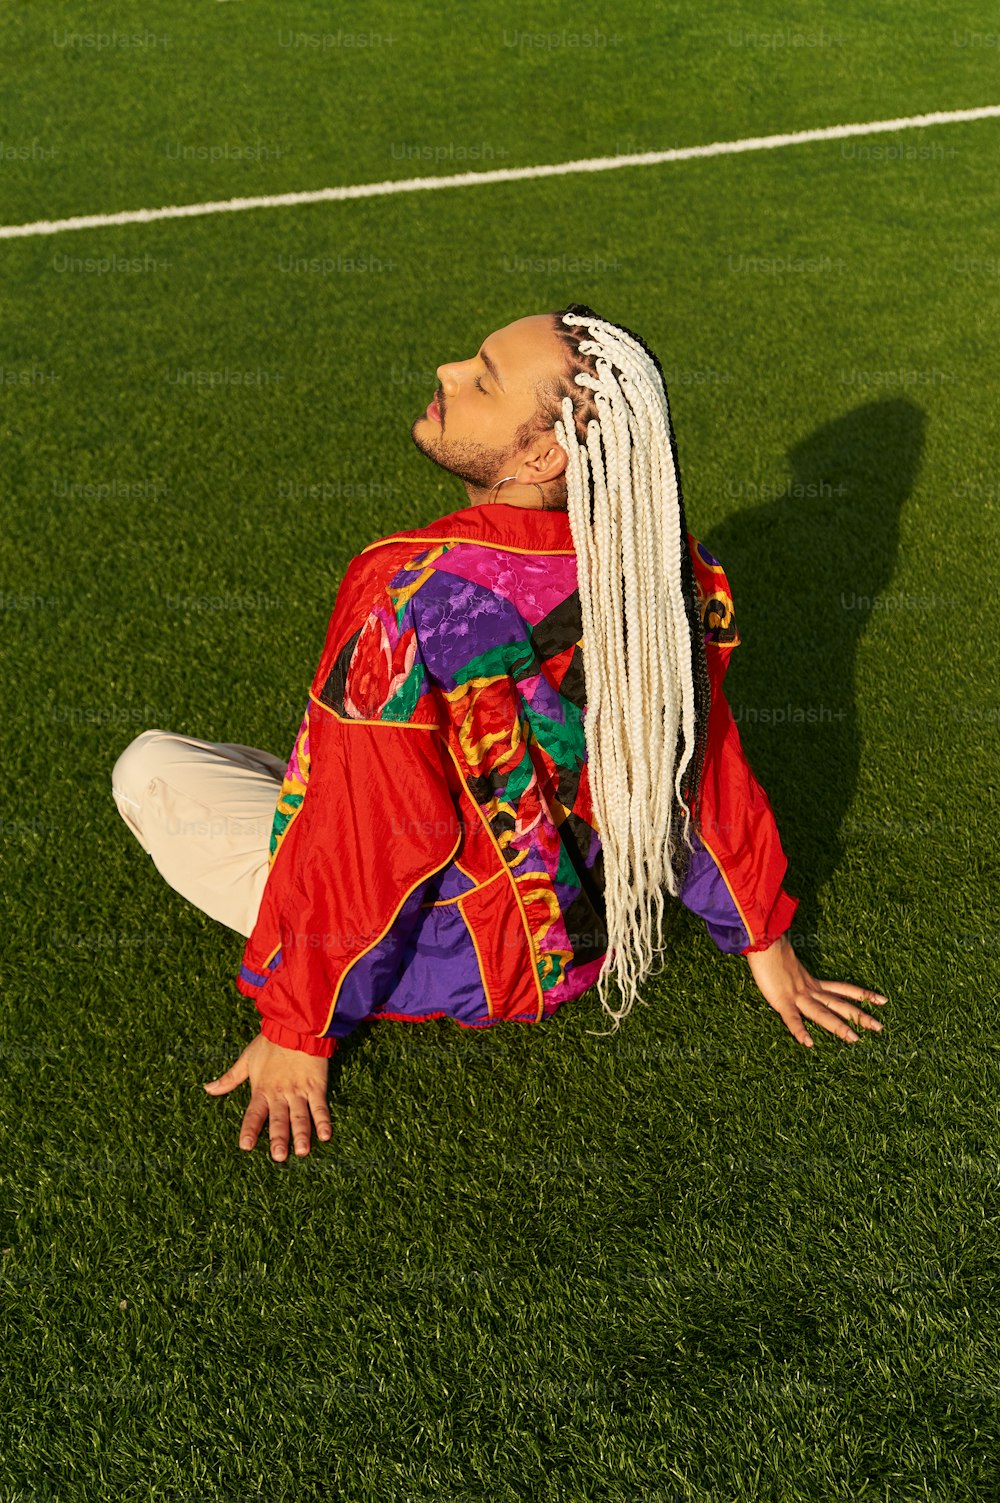 a man with long white hair sitting on a soccer field